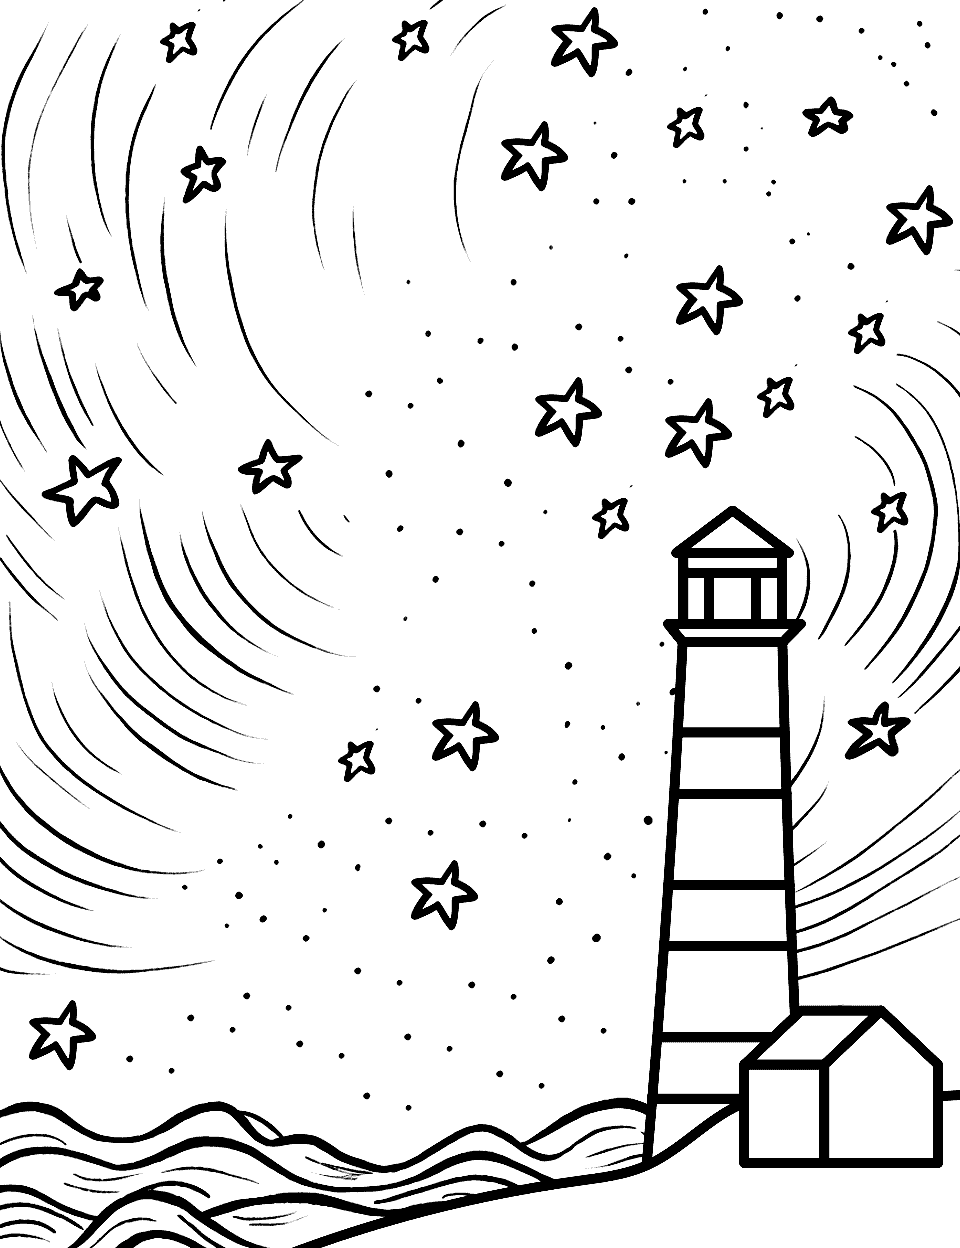 Starry Lighthouse Scene Star Coloring Page - A lighthouse in a star-filled sky.